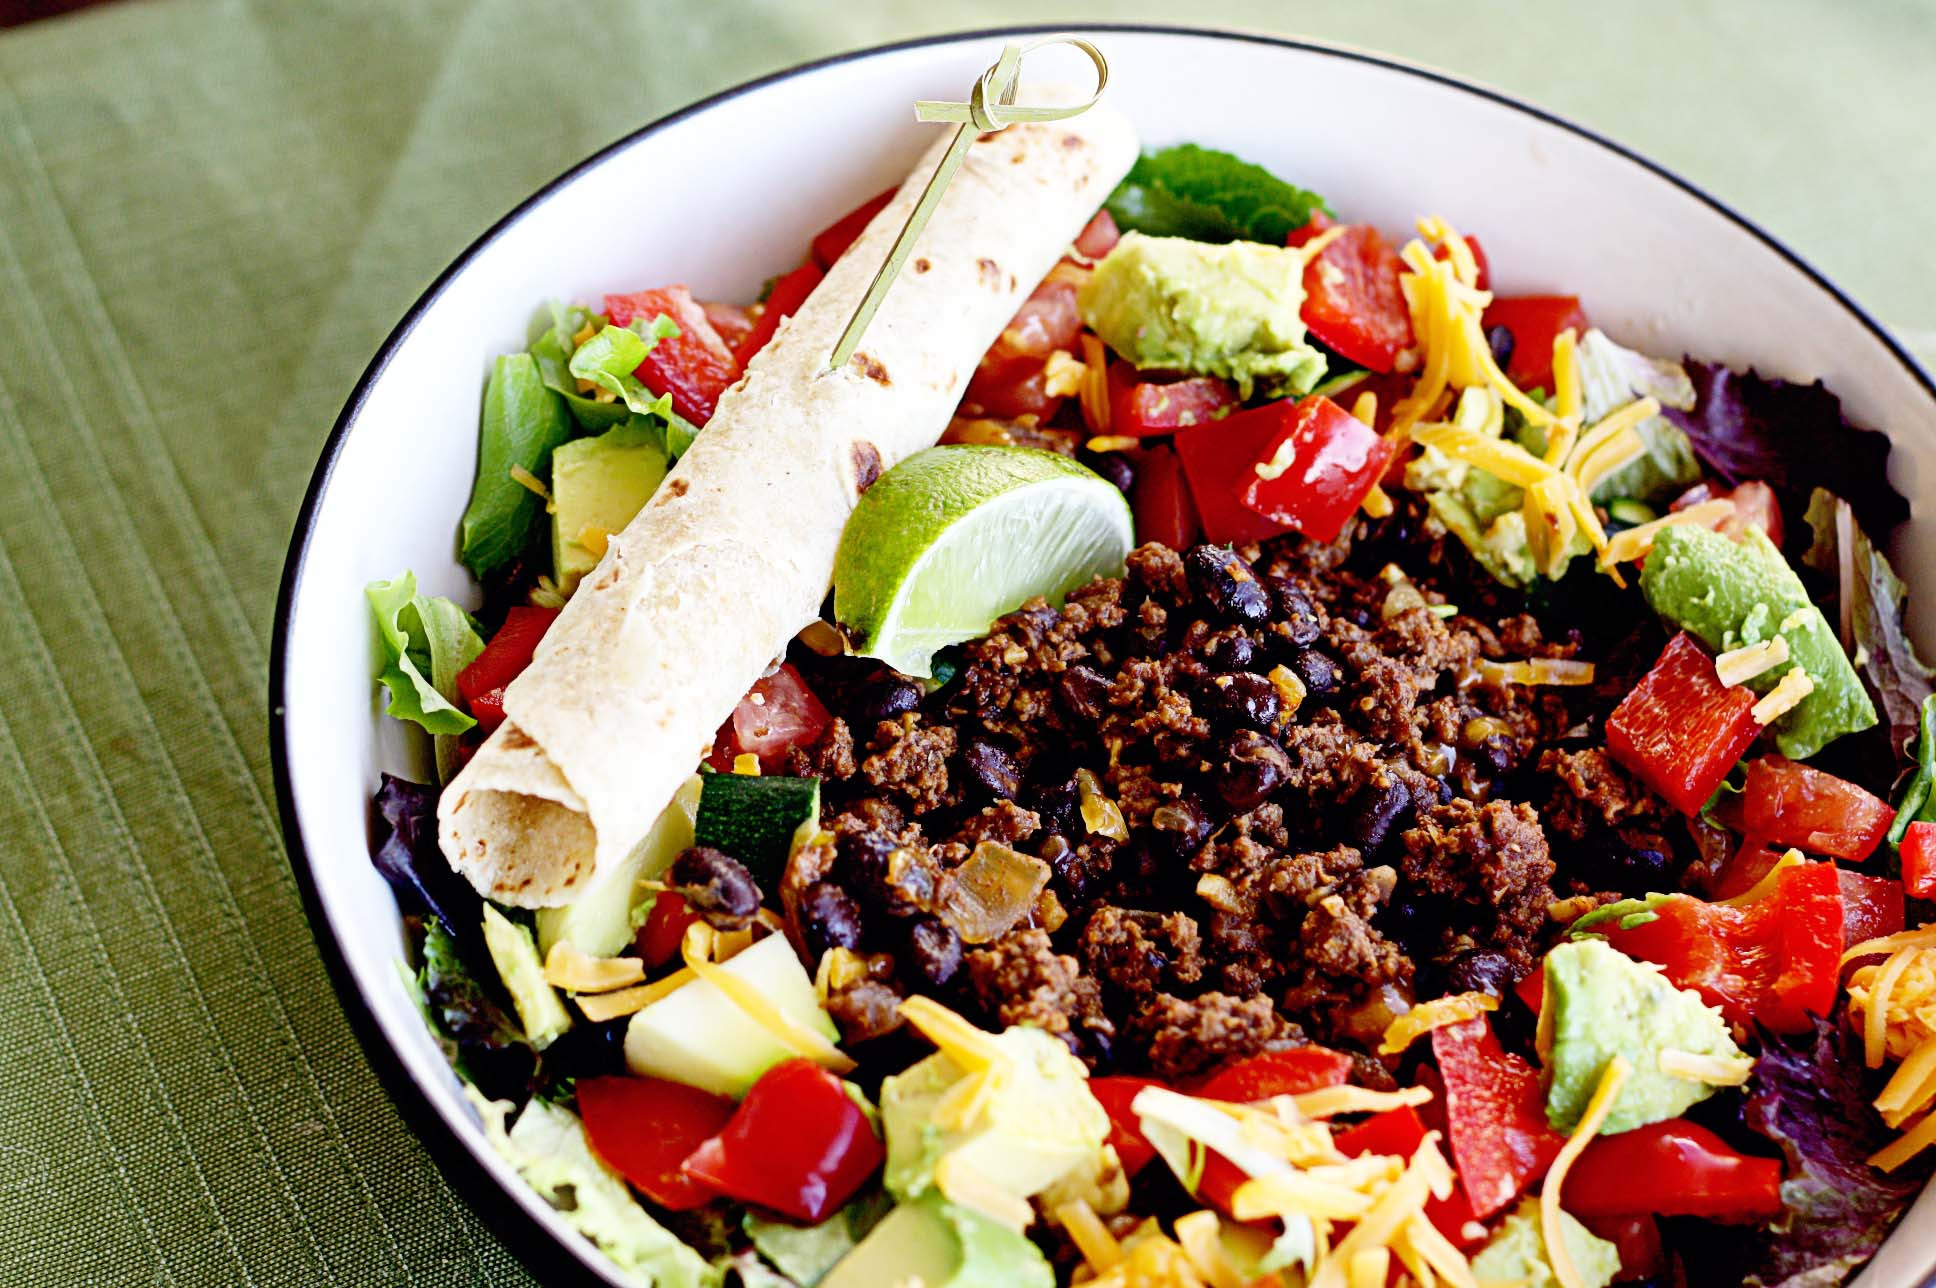 Healthy Beef Taco Salad
 The Healthier Side of a Taco Salad • Steele House Kitchen